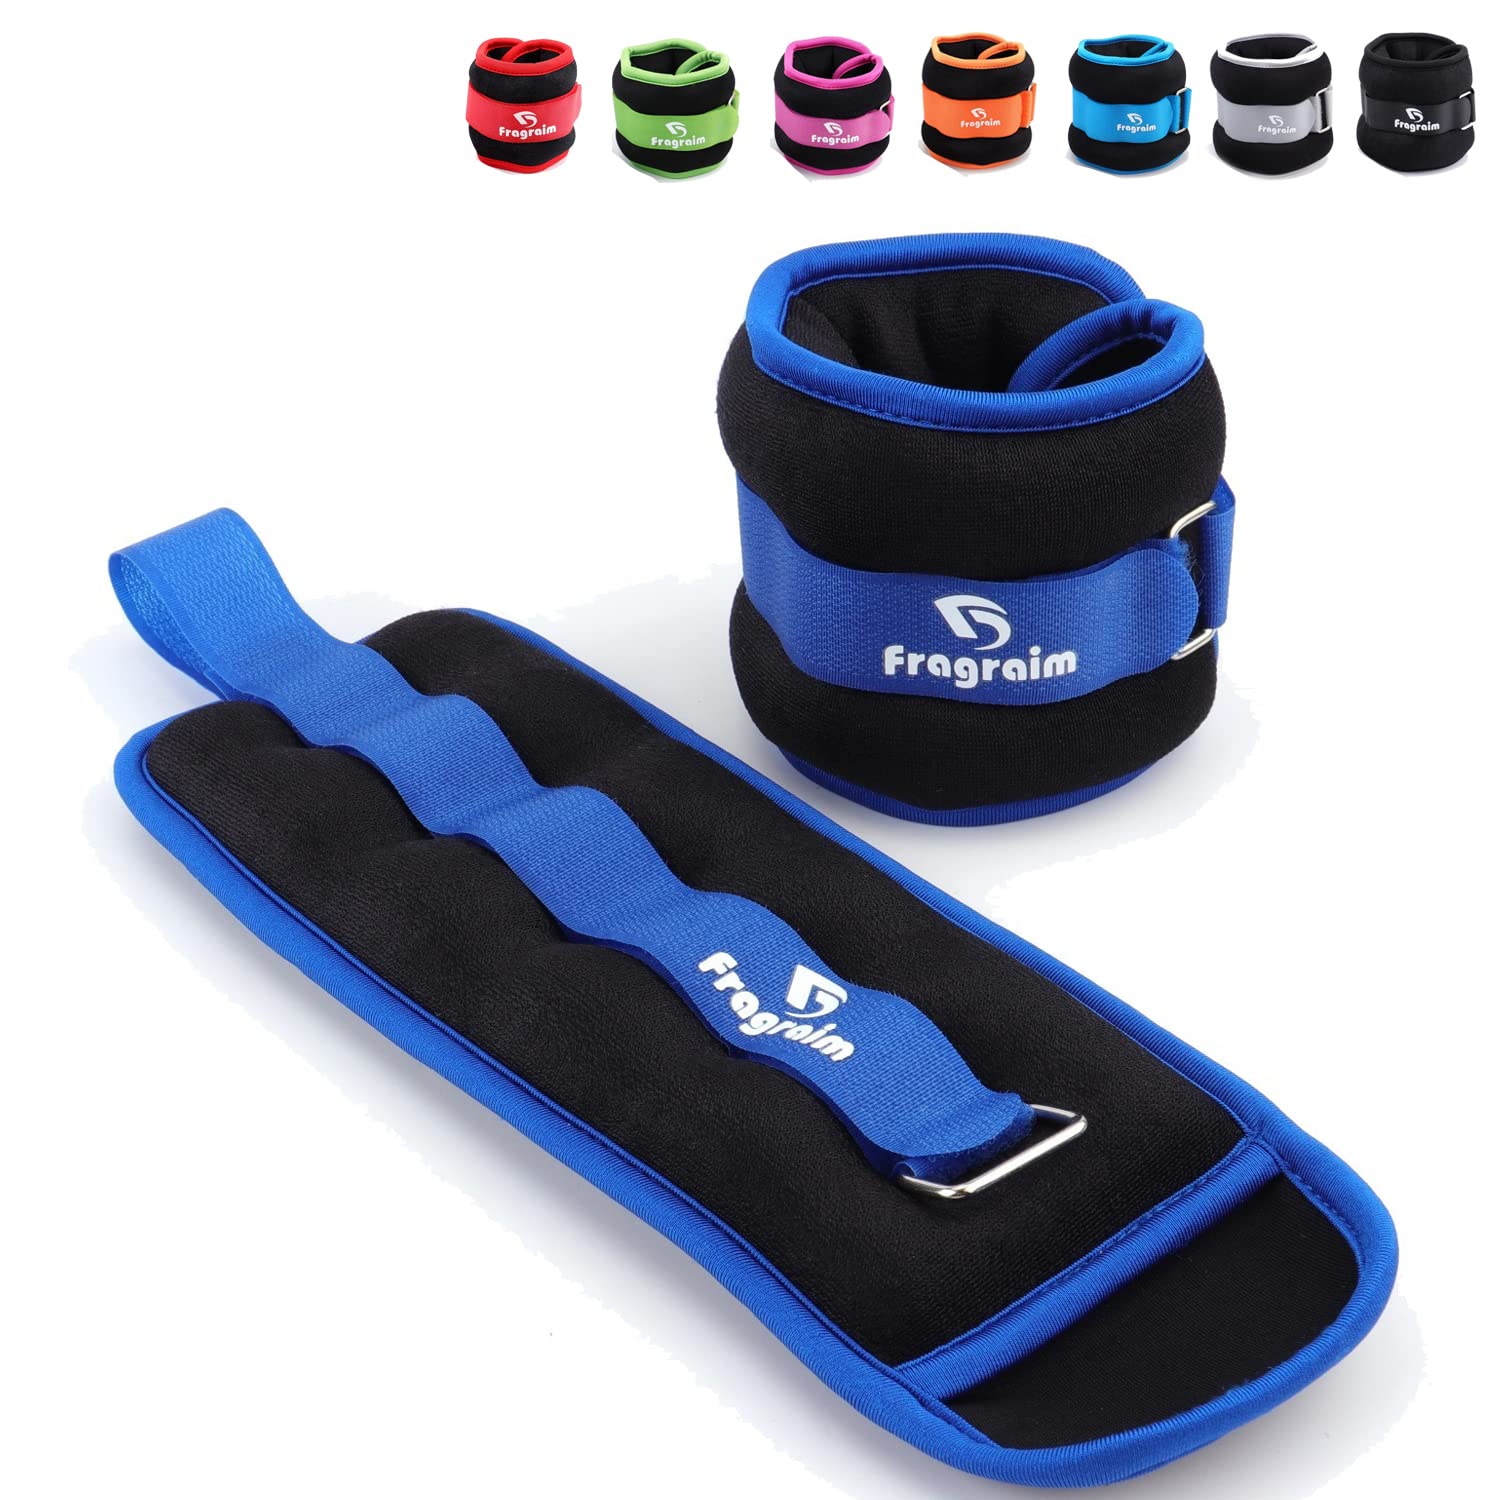 Fragraim Ankle Weights For Women, Men And Kids - 4 Lbs 1 Pair Strength Training Wristlegarm Weight With Adjustable Strap For Jog